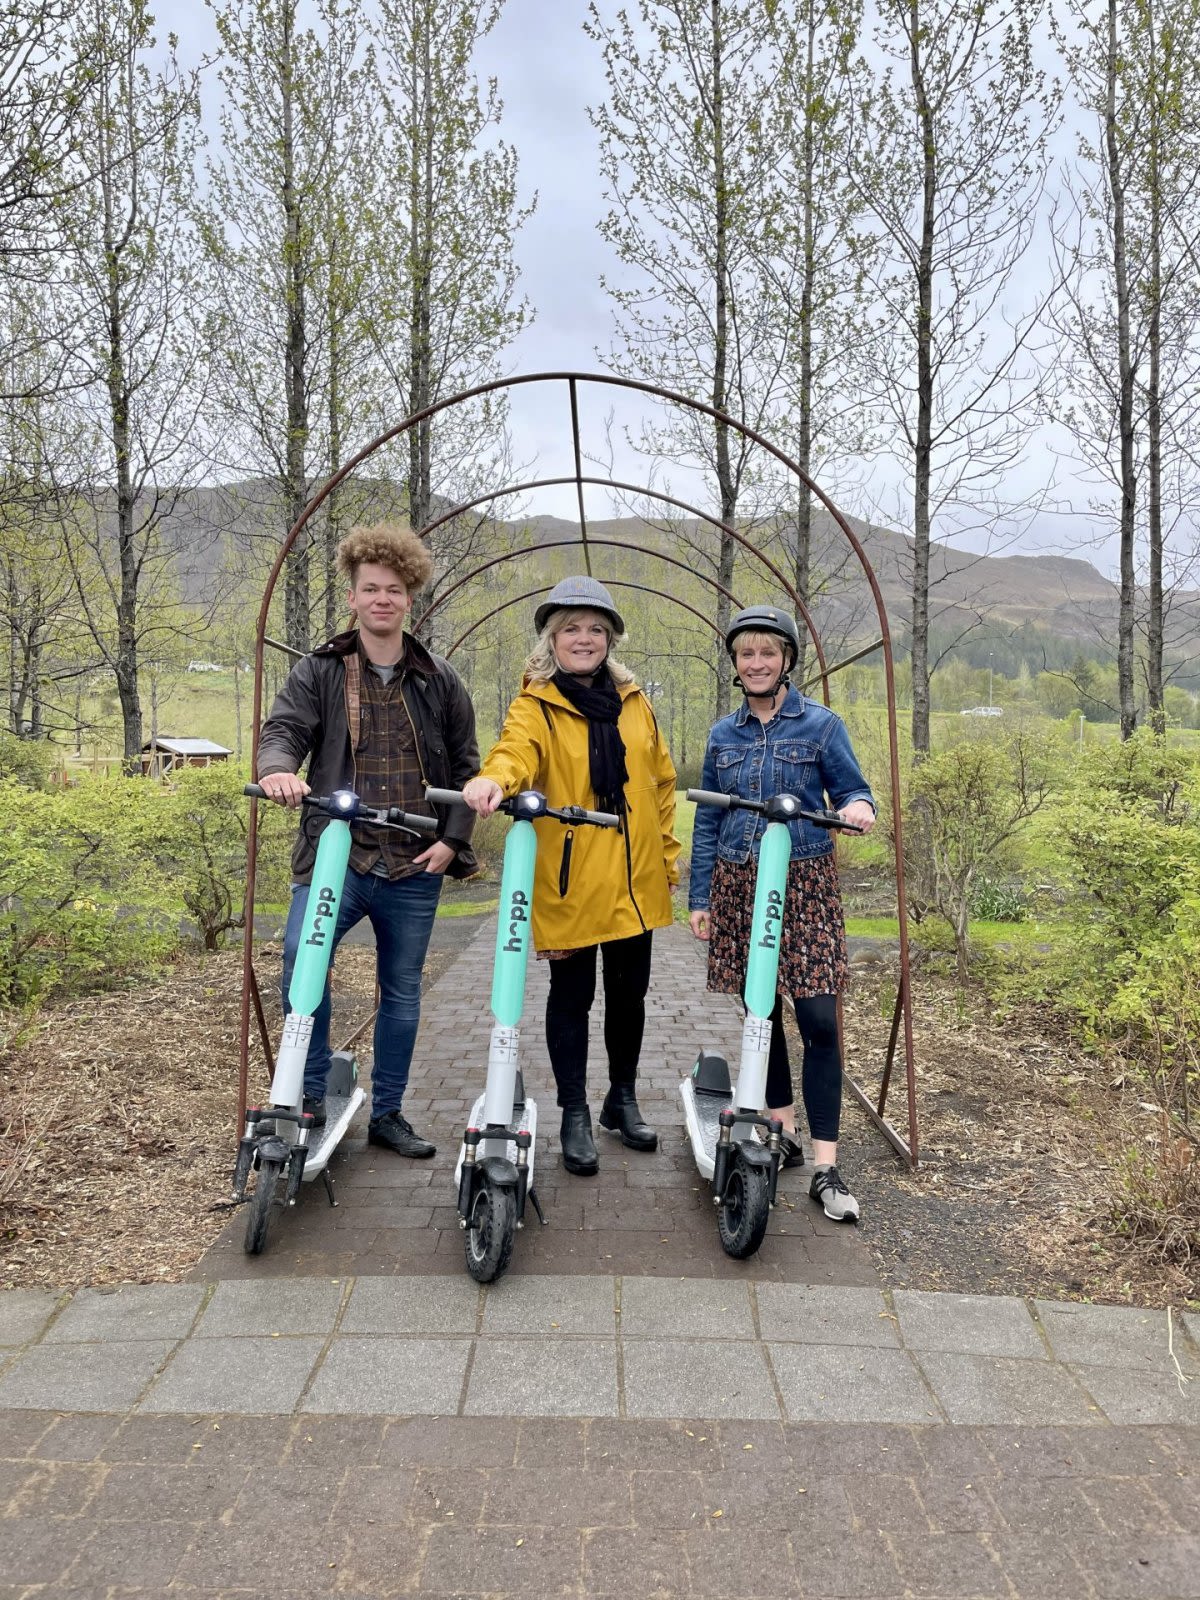 Stay cool while Hopping in one of the hottest places in Iceland. The geothermal town of Hveragerði now has 50 Hopp scooters ready to ride.